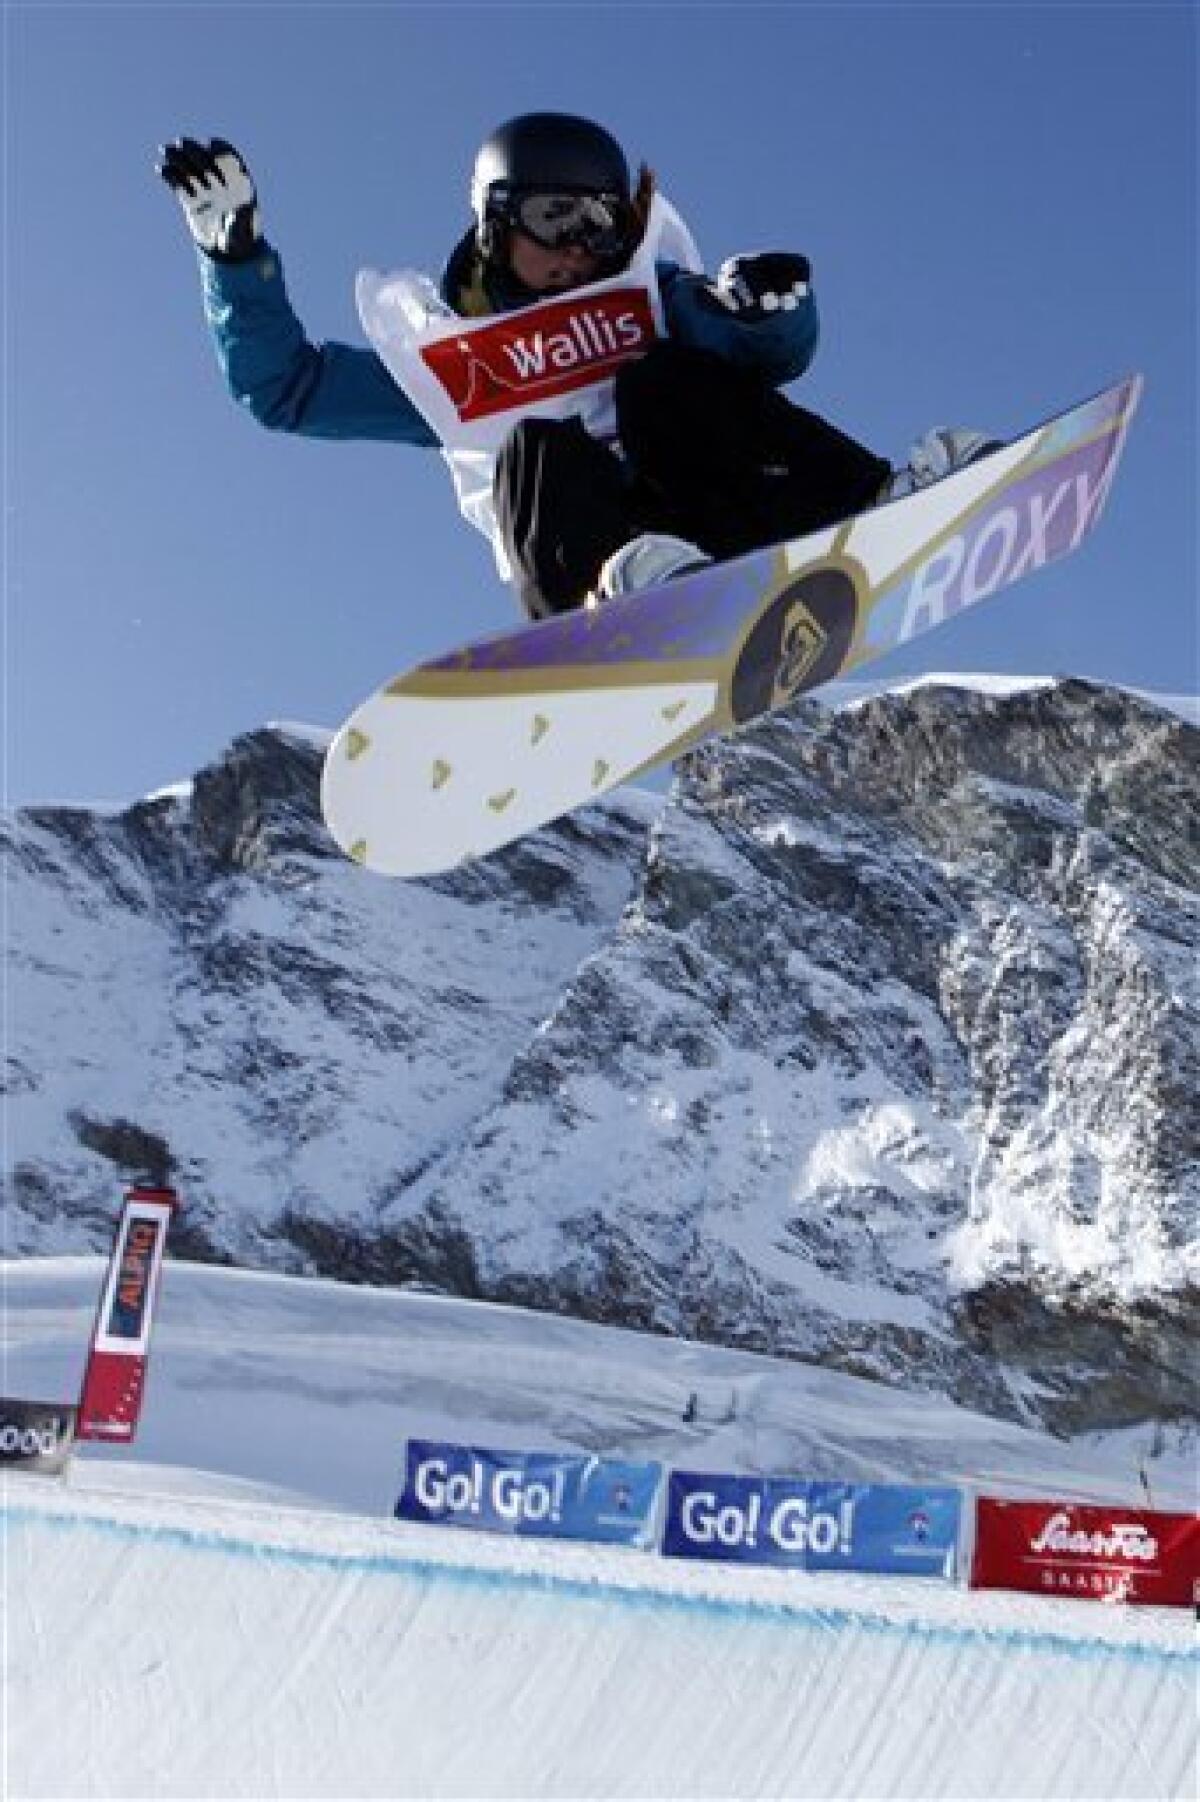 FILE - This is a Nov. 5, 2009, file photo showing Torah Bright of Australia competing during the final of the women's Snowboard Half-Pipe FIS World Cup 2009 event on the Allalin glacier in Saas-Fee, Switzerland. No longer must she fret about her left shoulder staying in place when she should be worrying about landing a switch backside 720. After spring surgery and months of rehab, all her focus can be on preparing for February's Vancouver Olympics, where the 22-year-old Bright will be a gold medal favorite. (AP Photo/Keystone/ Photopress, Jean-Christophe Bott, File)